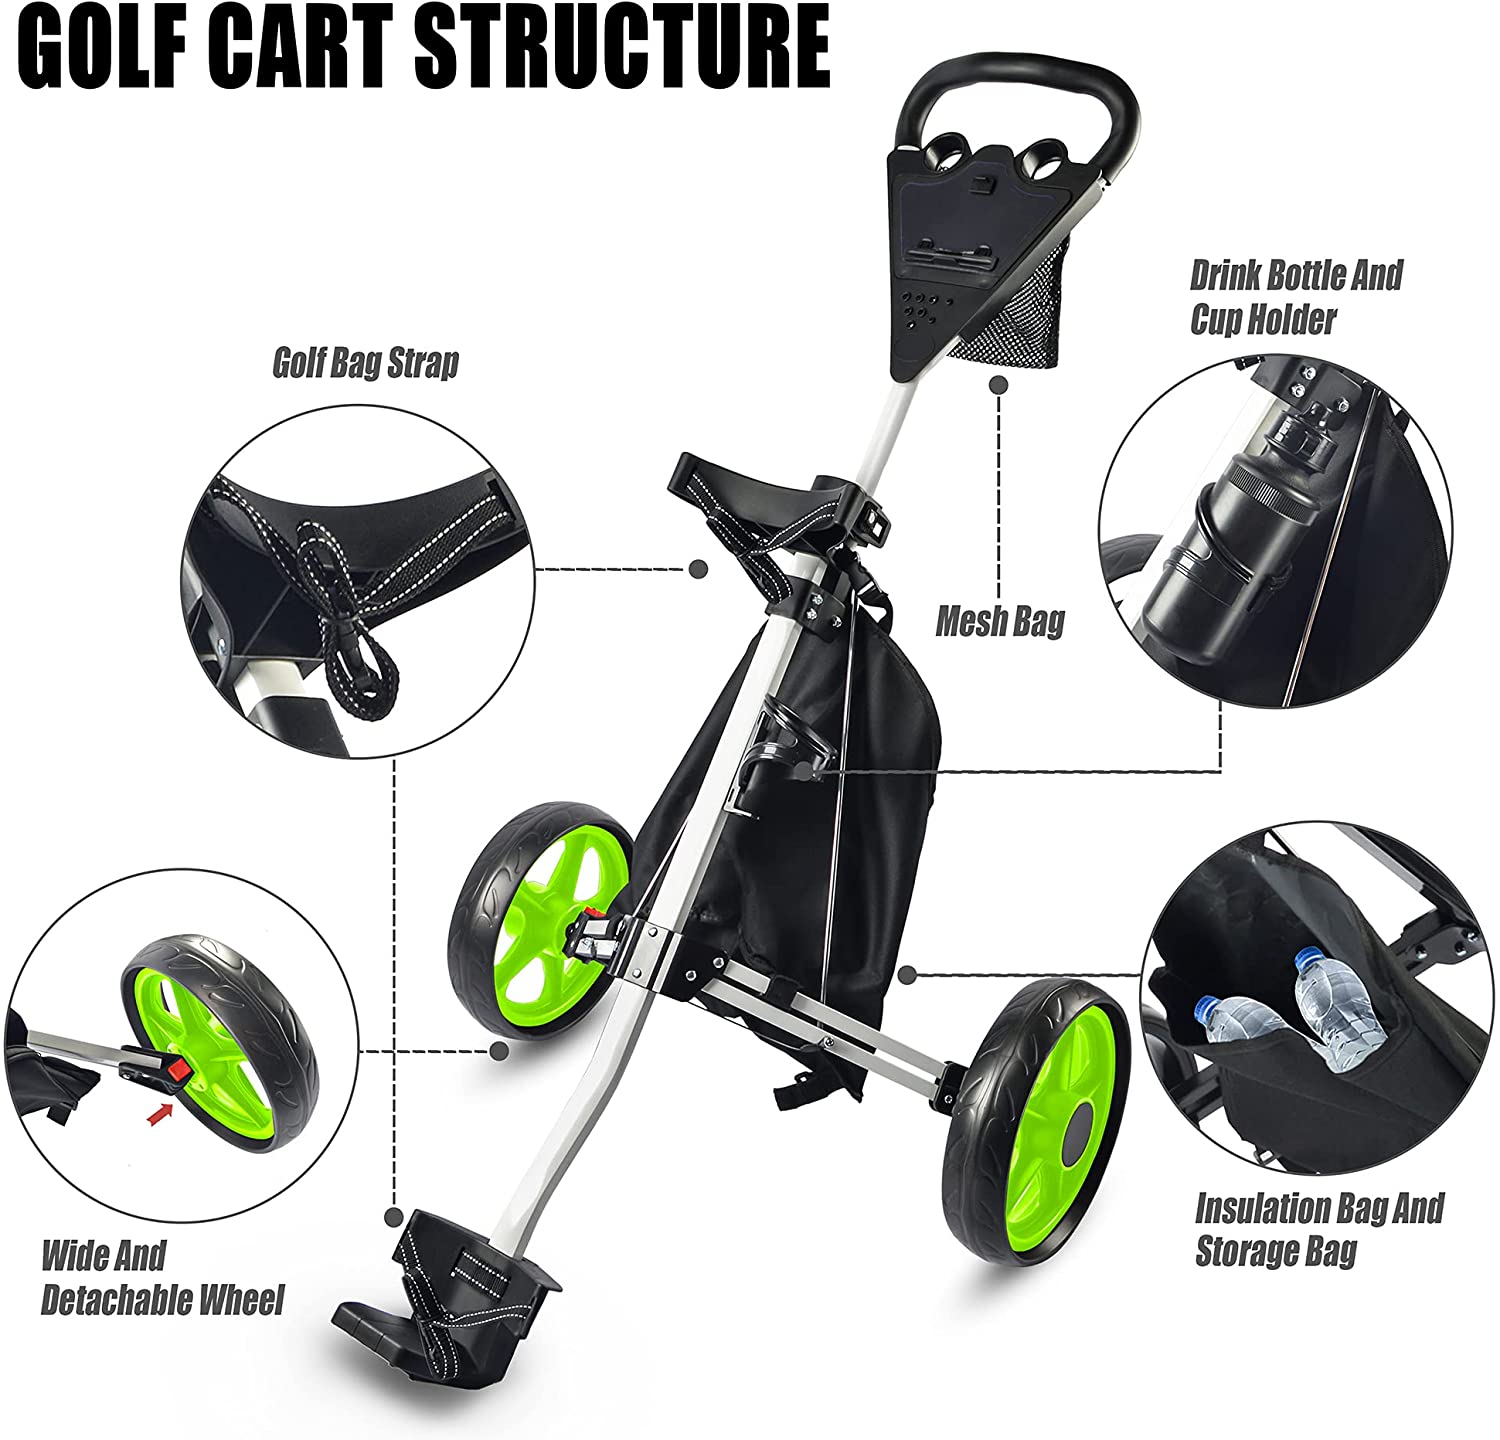 BOBOPRO Golf Cart,Golf Pull Cart Trolley,2 Wheels One Second to Open & Close Folding Cart,Storage Bag,Cup Holder, Golf Bag Holder,Lightweight Compact Golf Accessories, Best Gifts for Men Women - image 2 of 6